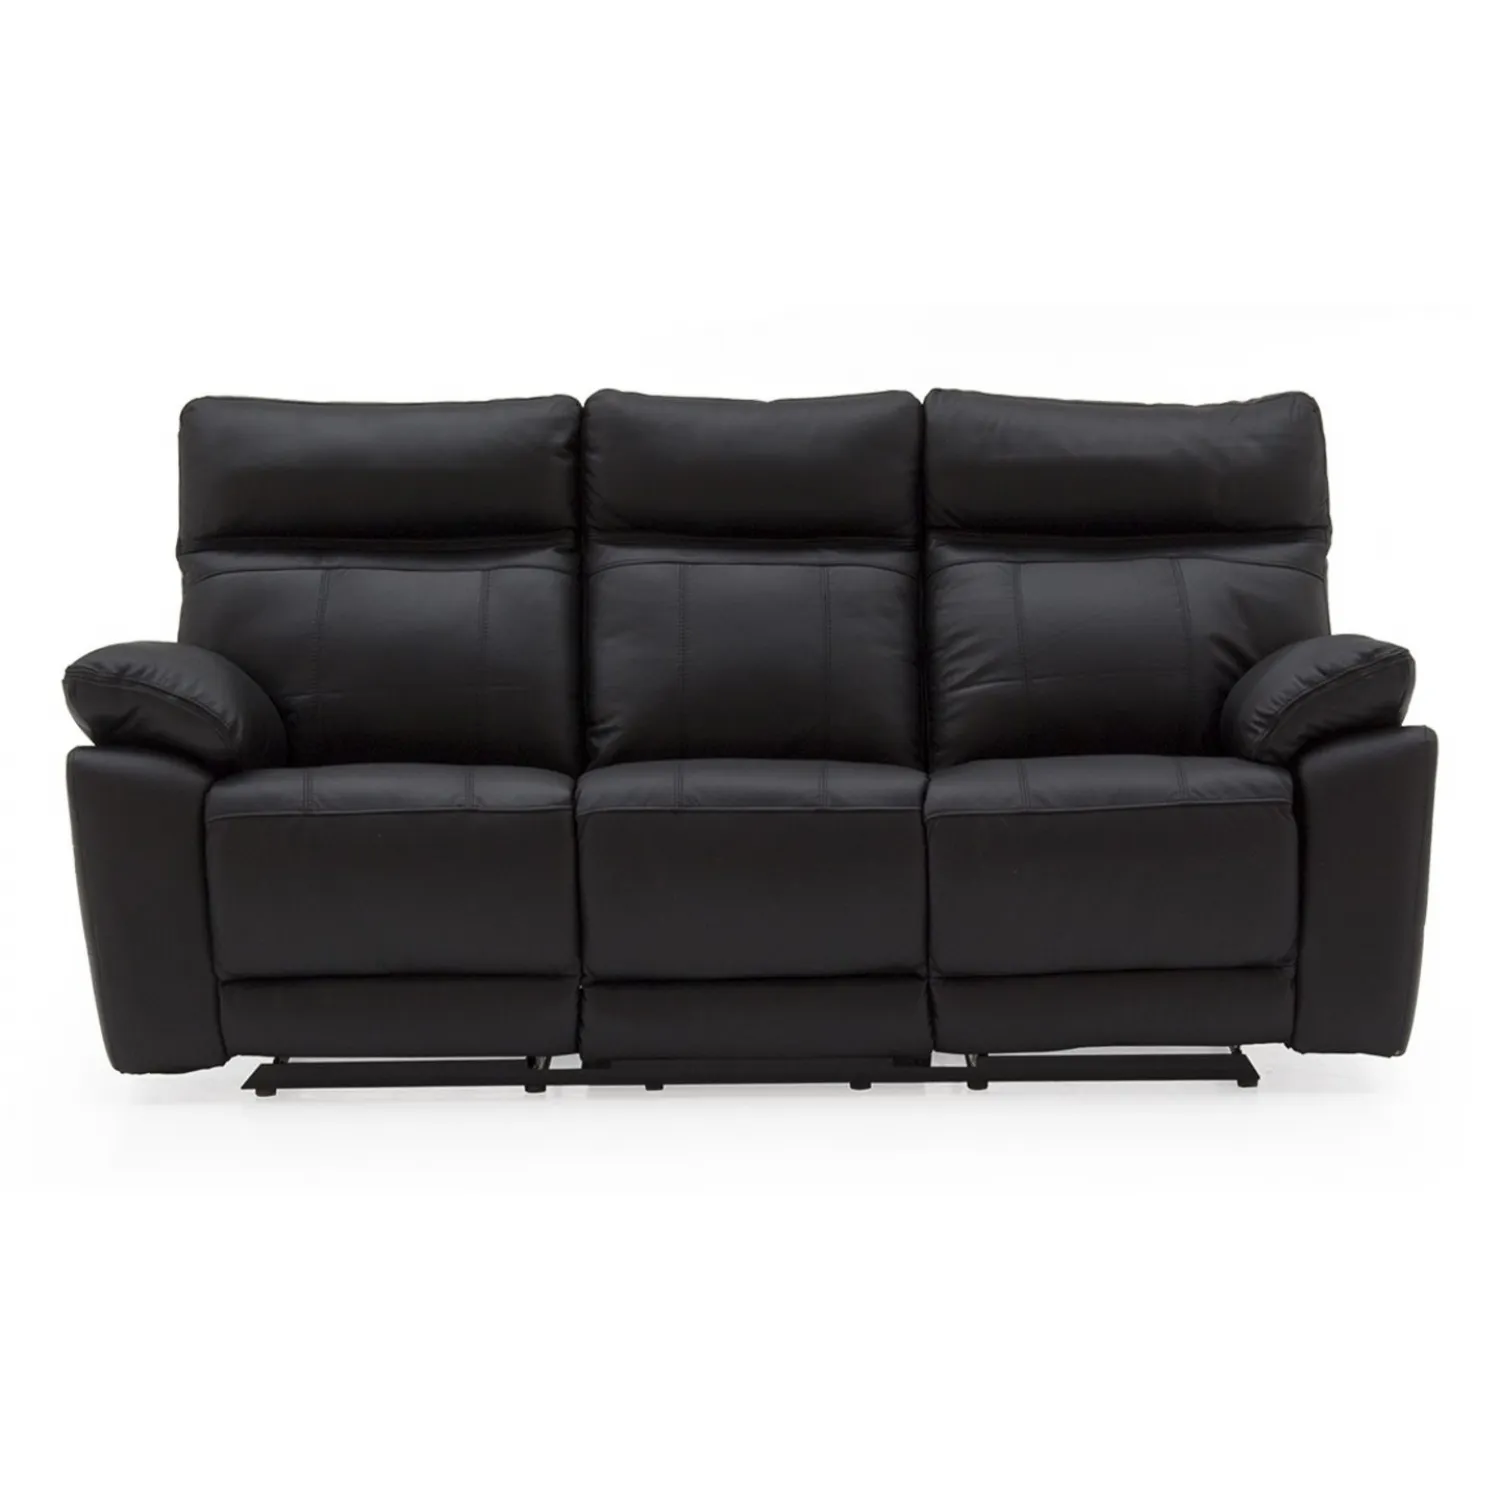 Black Leather 3 Seater Manual Recliner Sofa